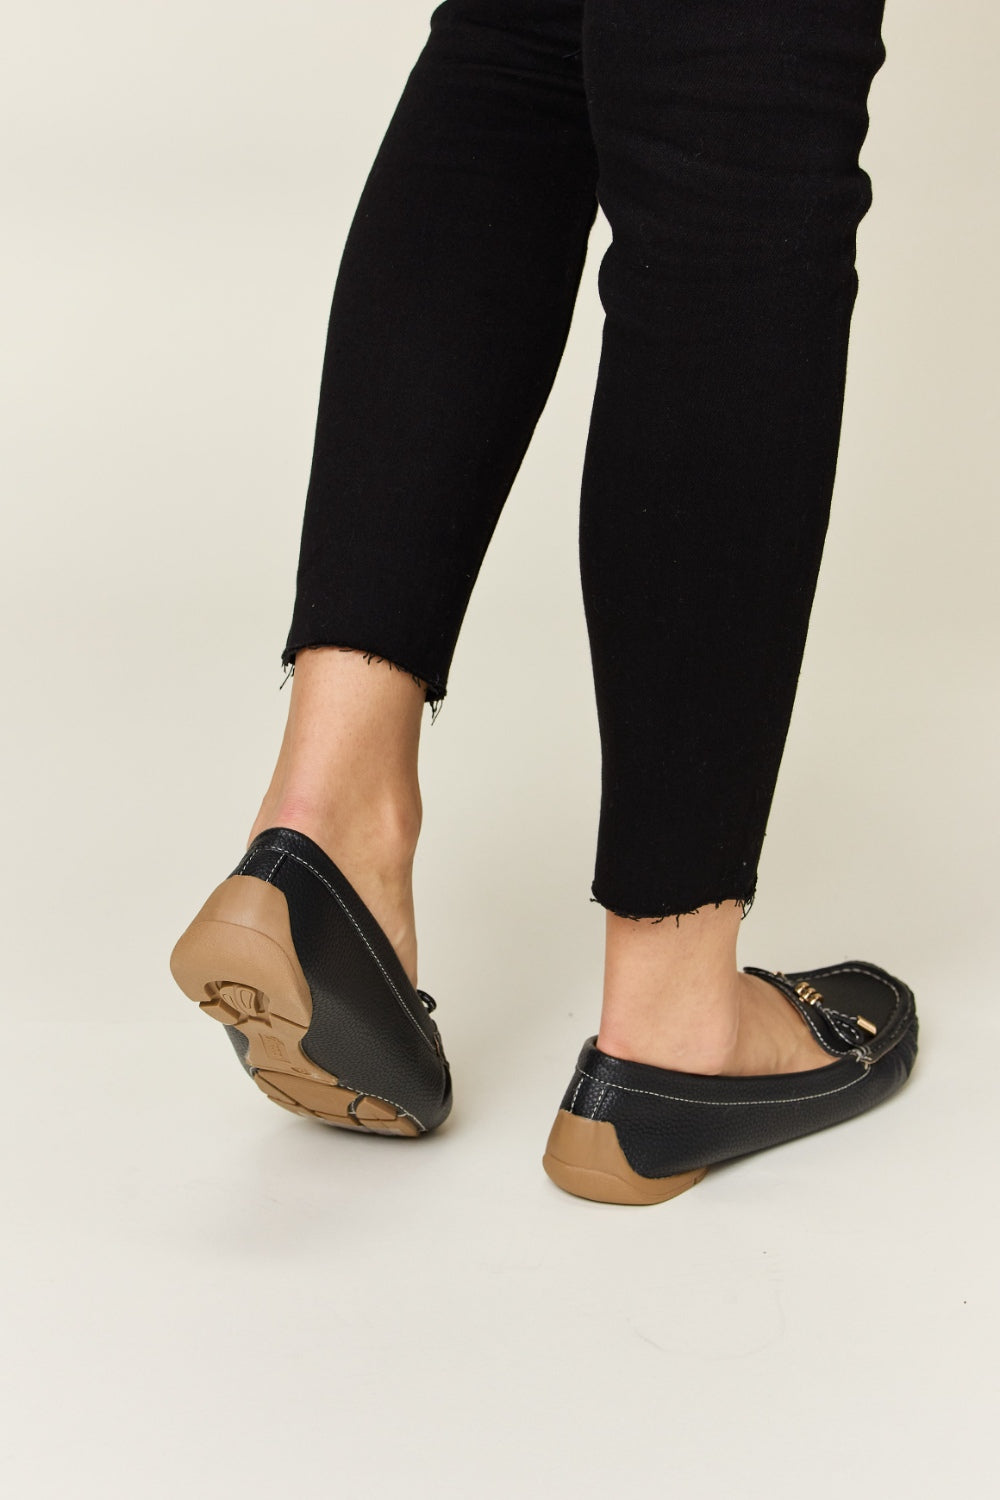 Black Forever Link Slip On Bow Flats Loafers Sentient Beauty Fashions Apparel & Accessories